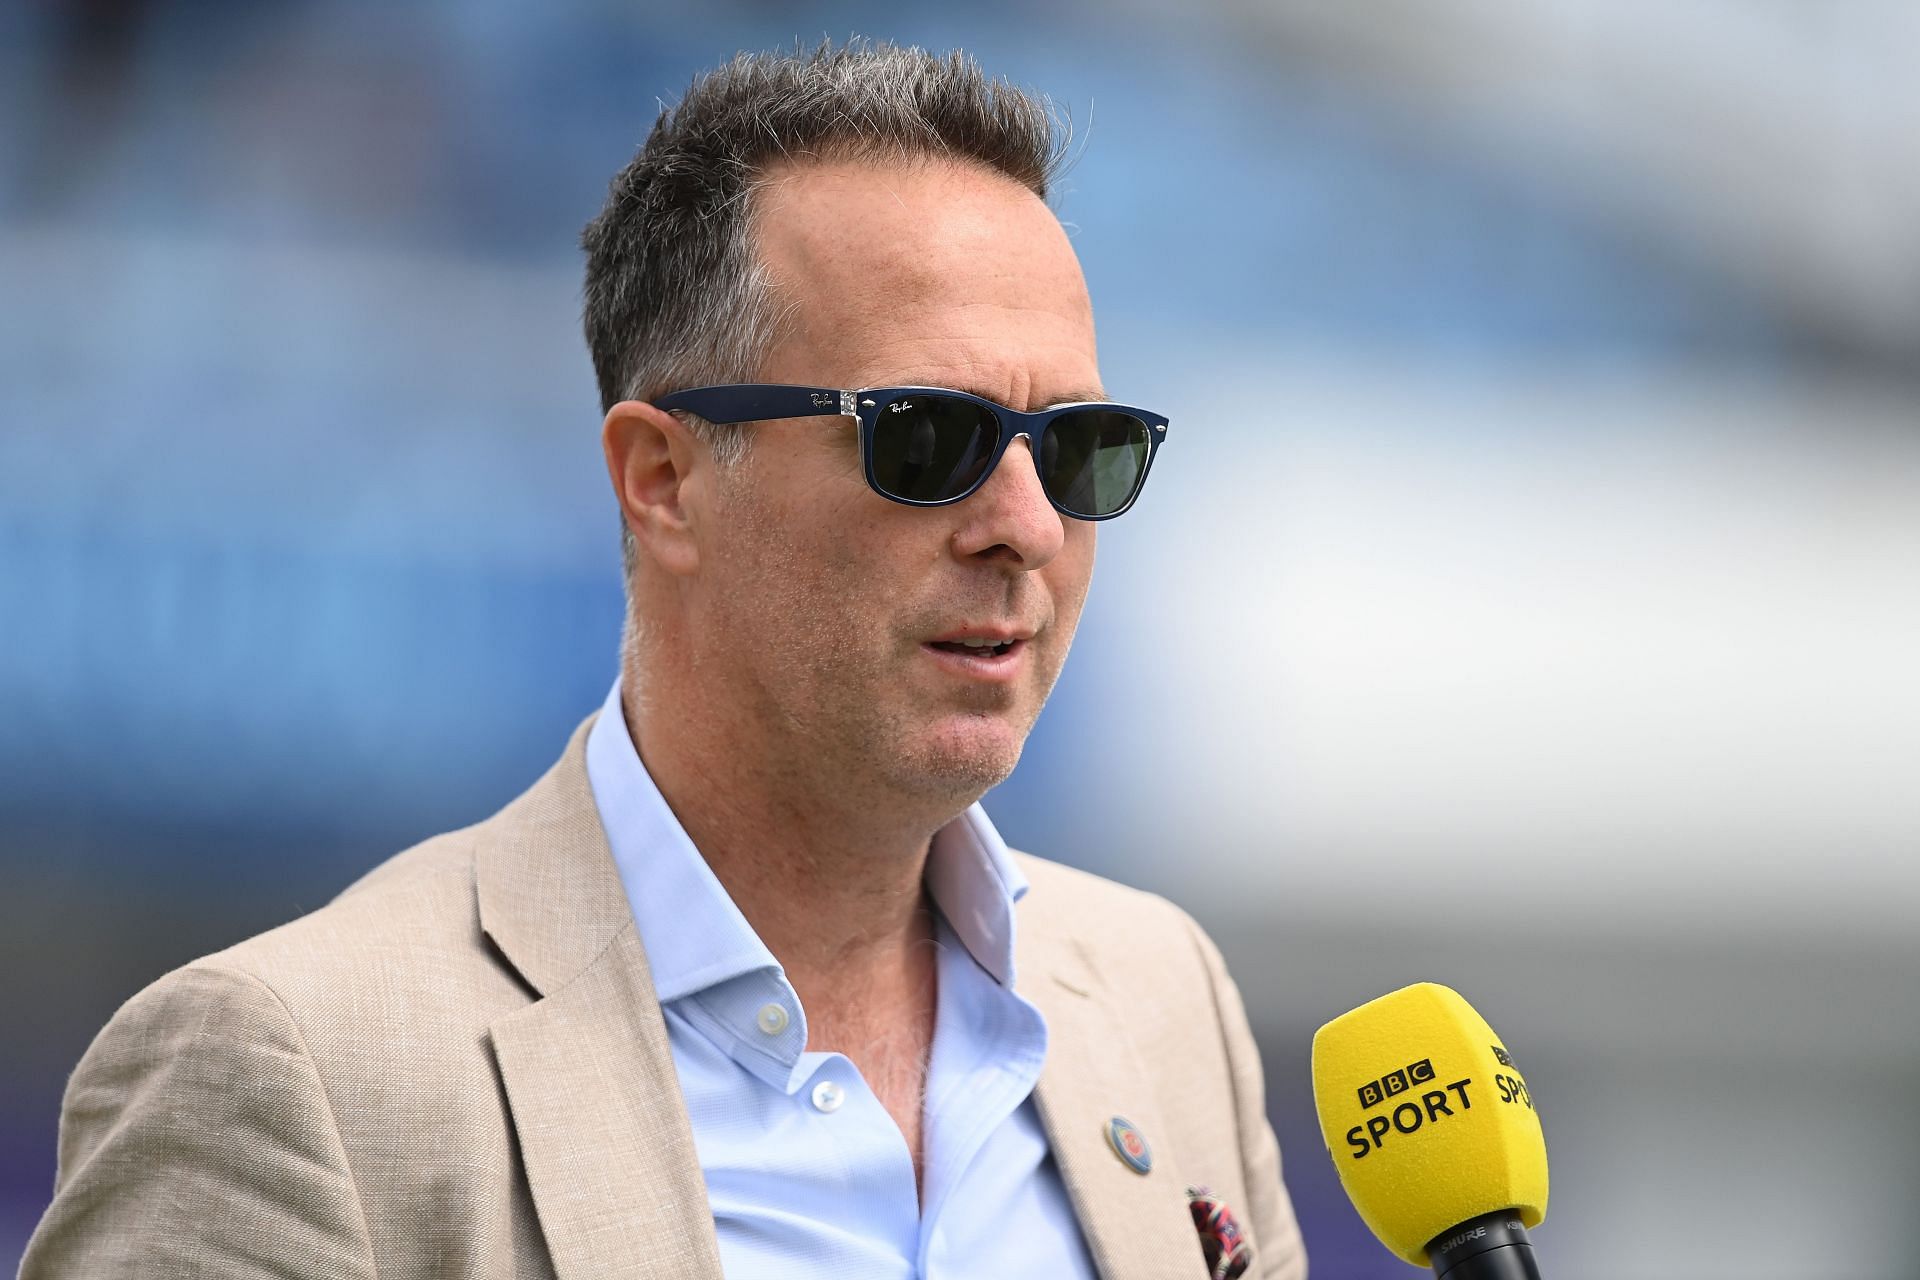 Michael Vaughan is unimpressed with Zak Crawley. (Image Credits: Getty)